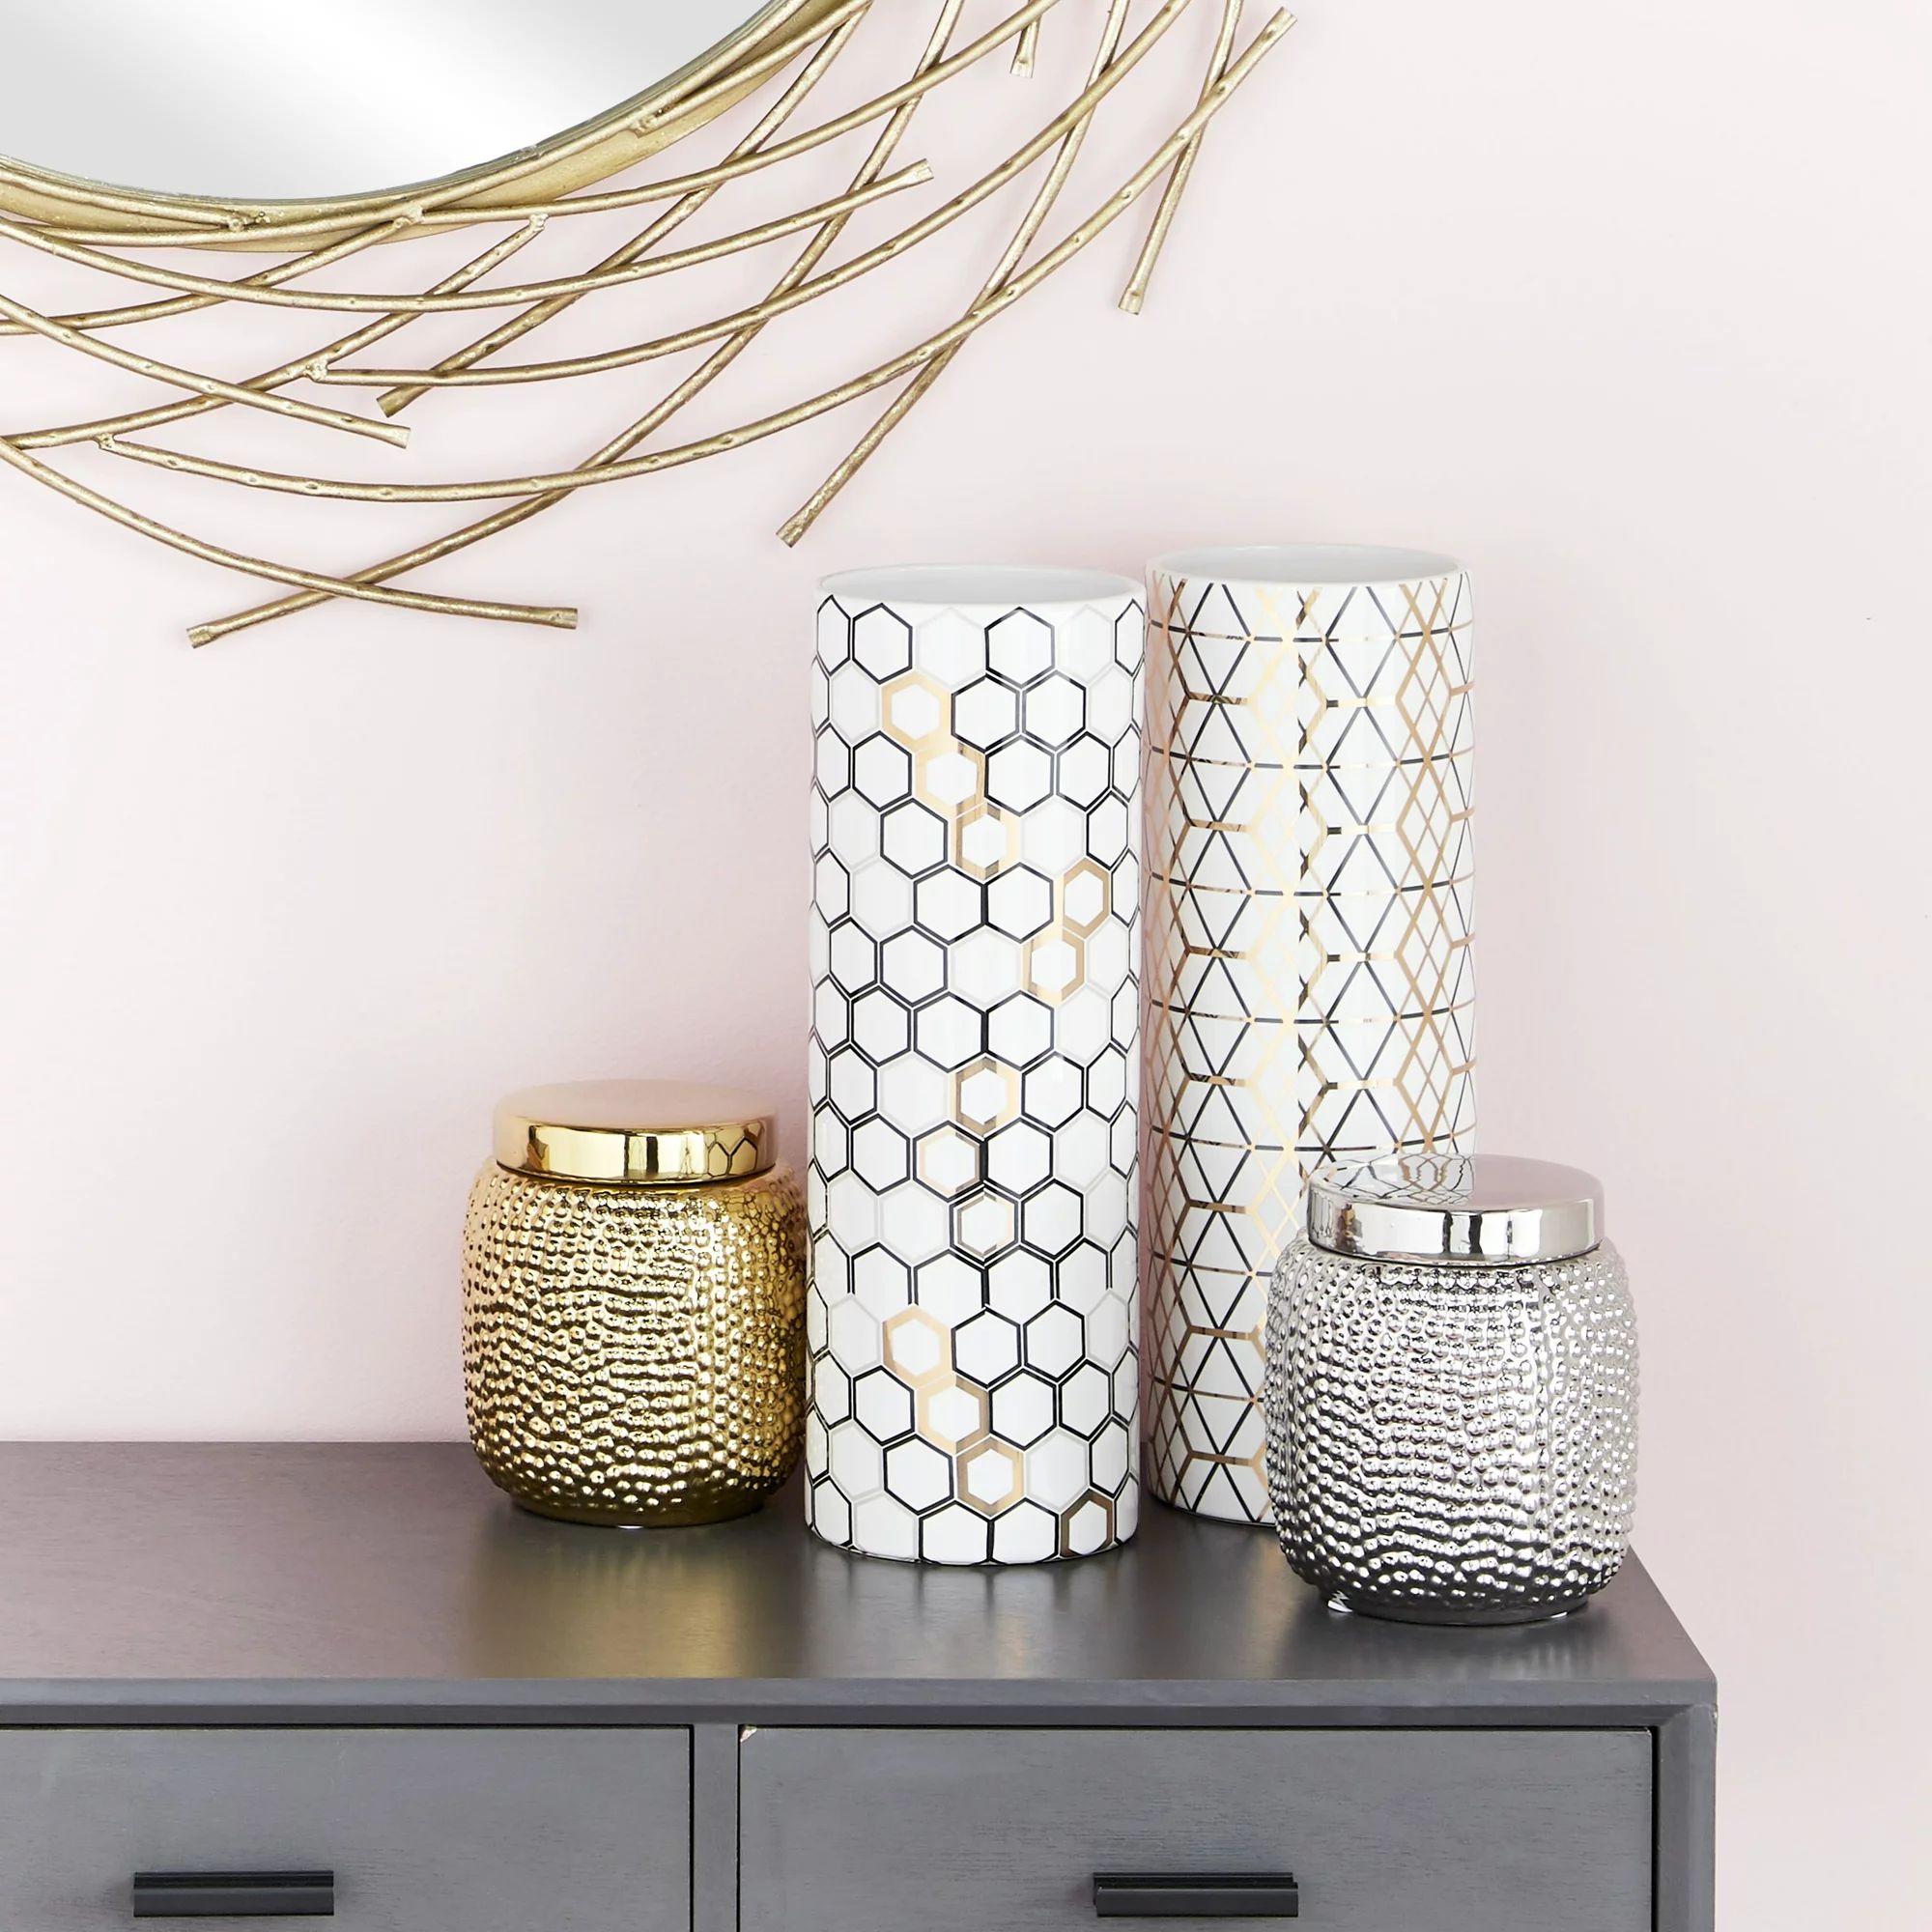 CosmoLiving Tall, White, Cylinder Vases with Black & Gold Eclectic Patterns | Set of 2: 5" x 14" ... | Walmart (US)